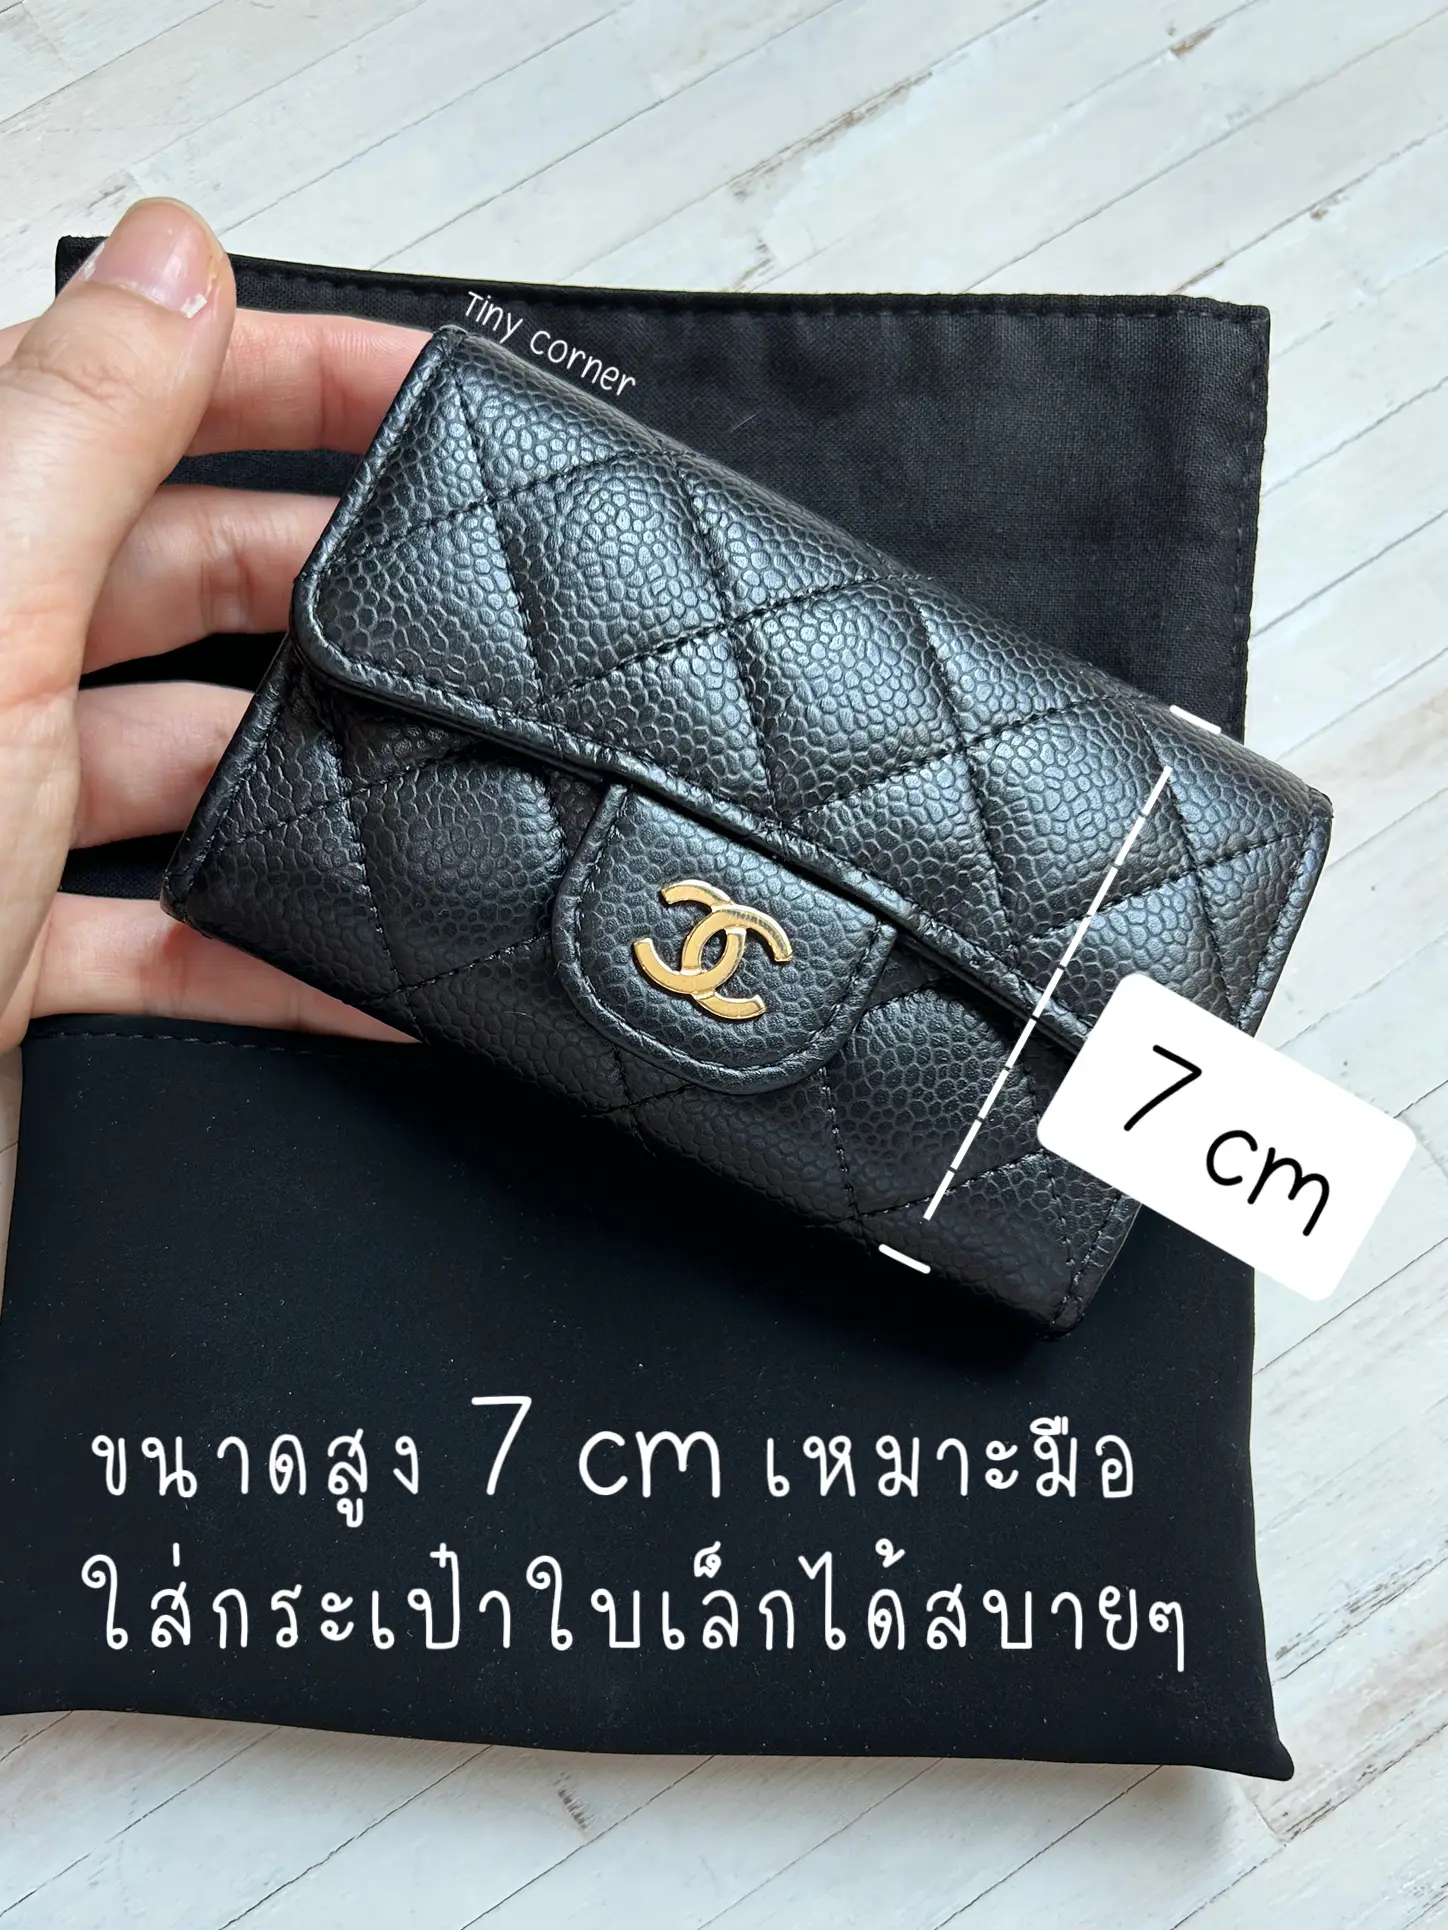 Let's see what Chanel's most popular card holder can wear., Gallery posted  by Tiny corner